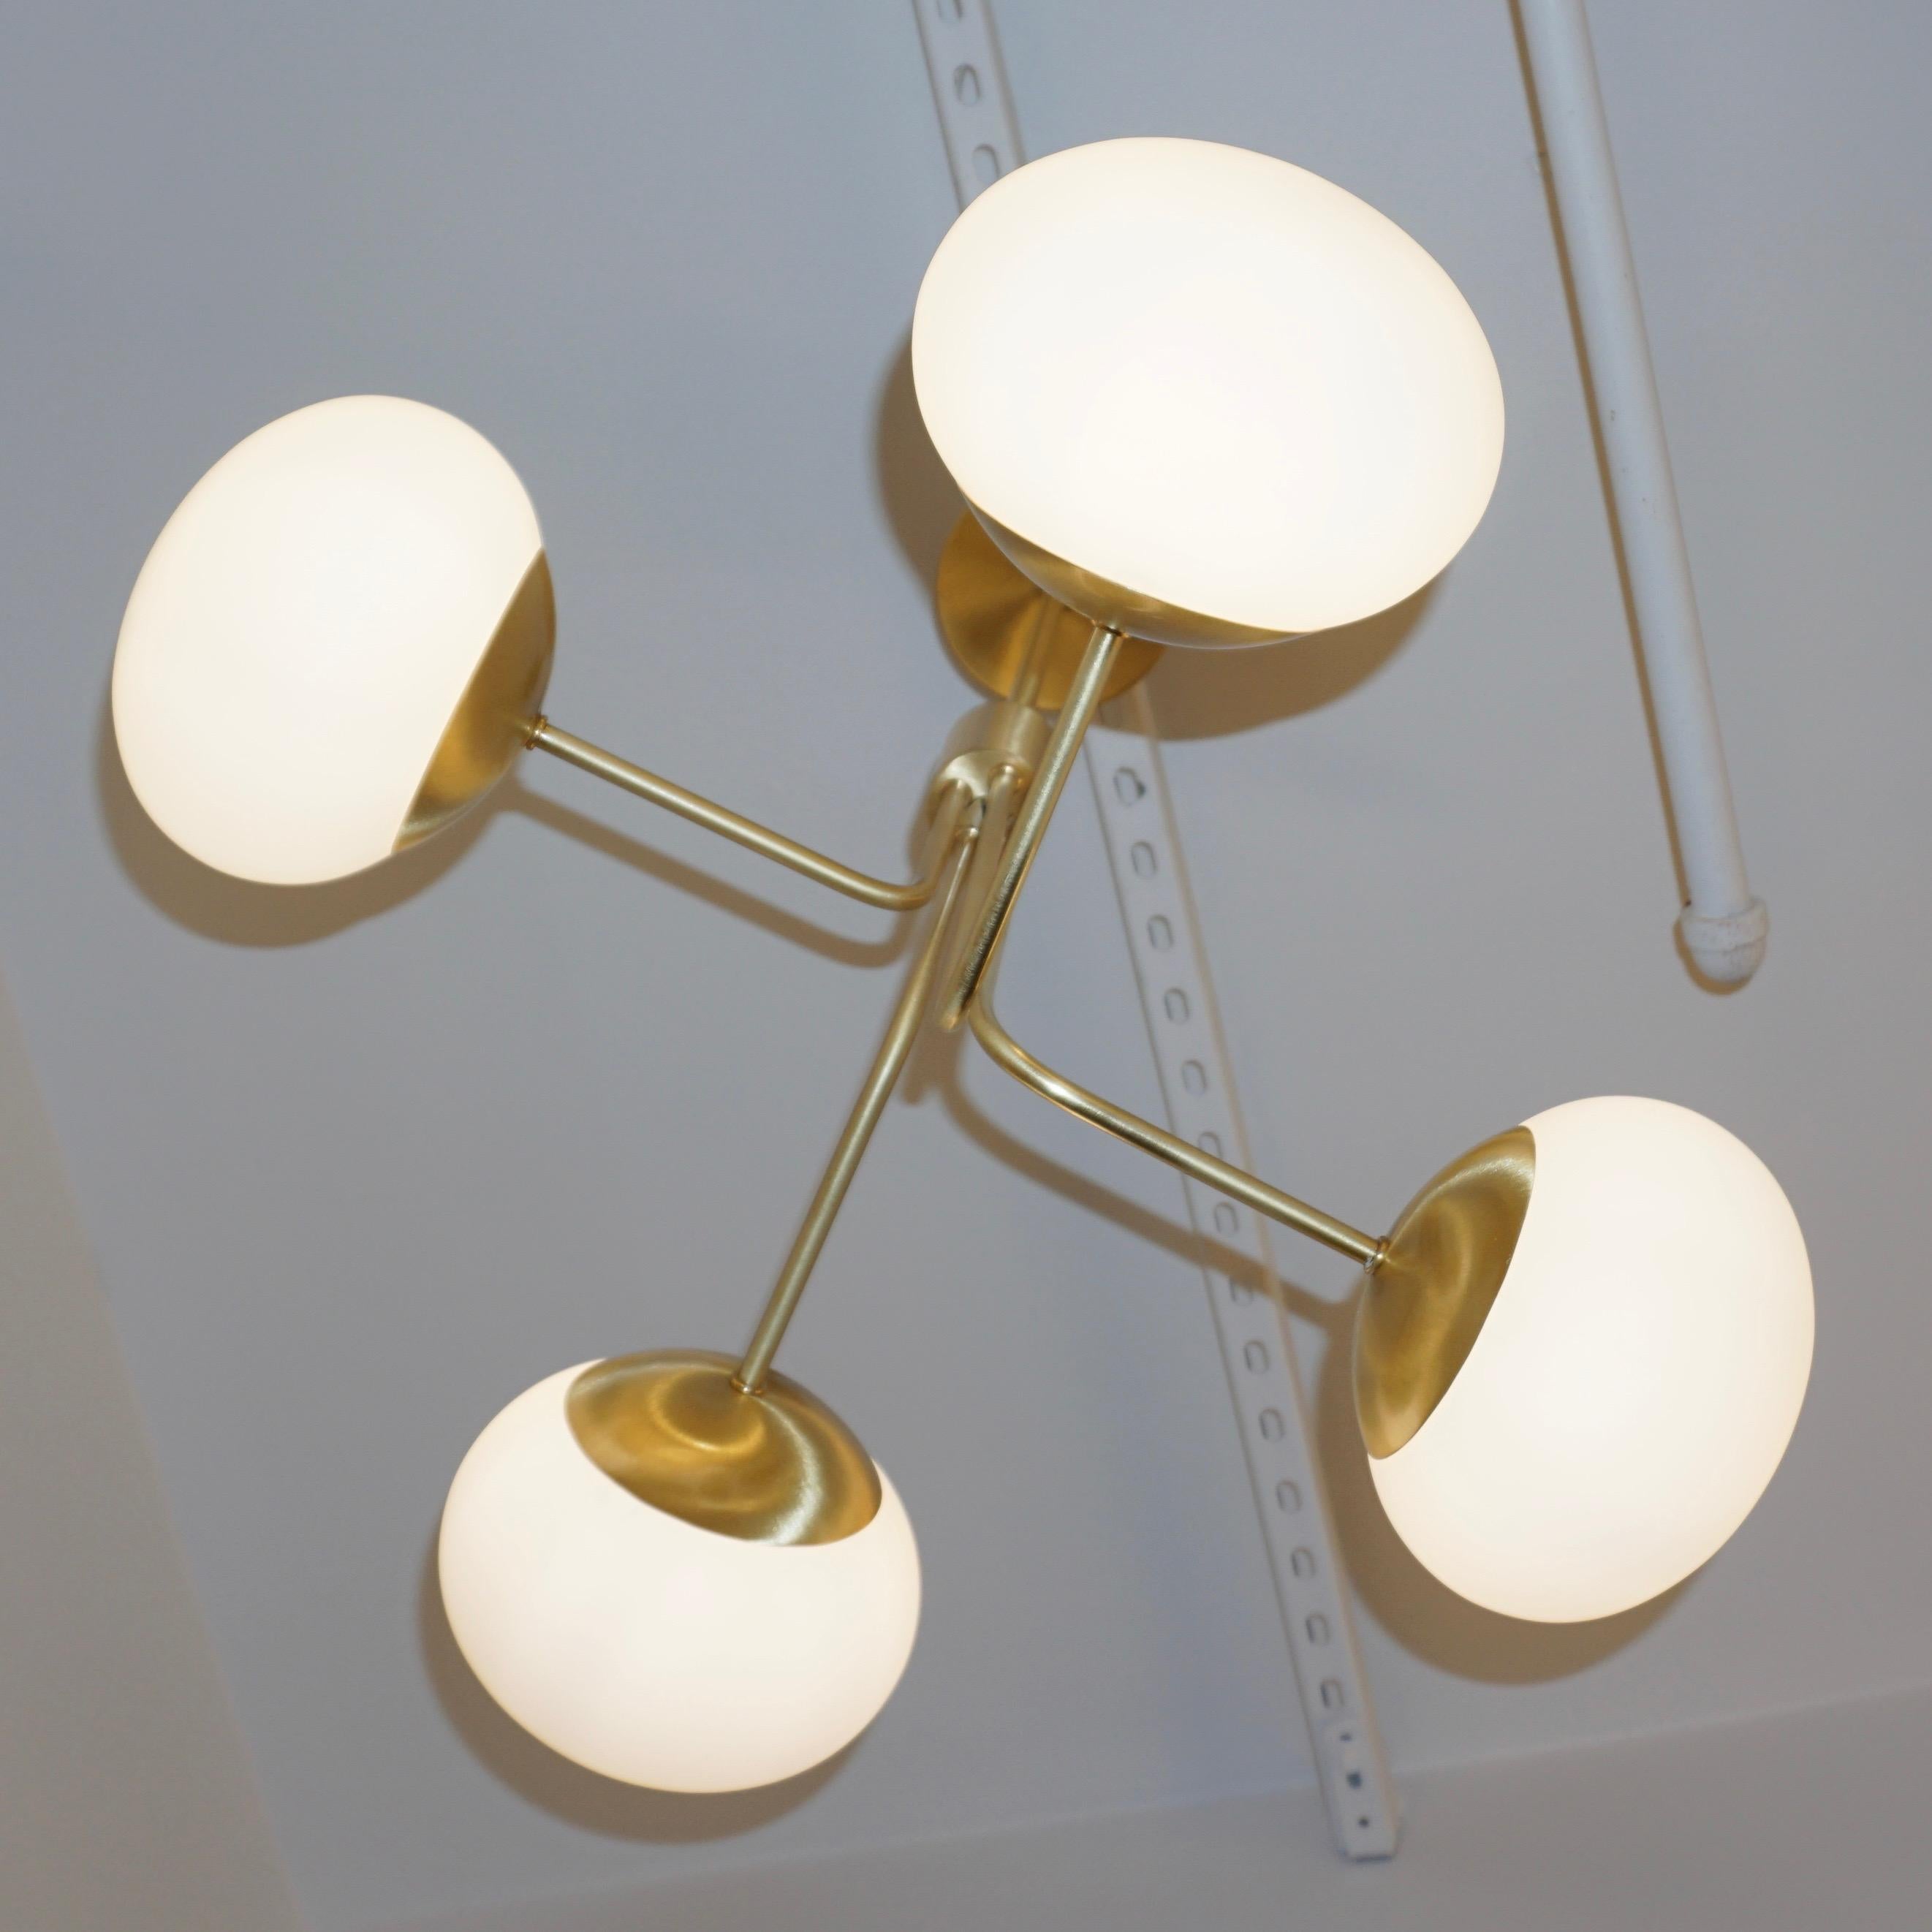 Contemporary Italian Modern Satin Brass & 4 White Murano Glass Globe Chandelier In New Condition For Sale In New York, NY